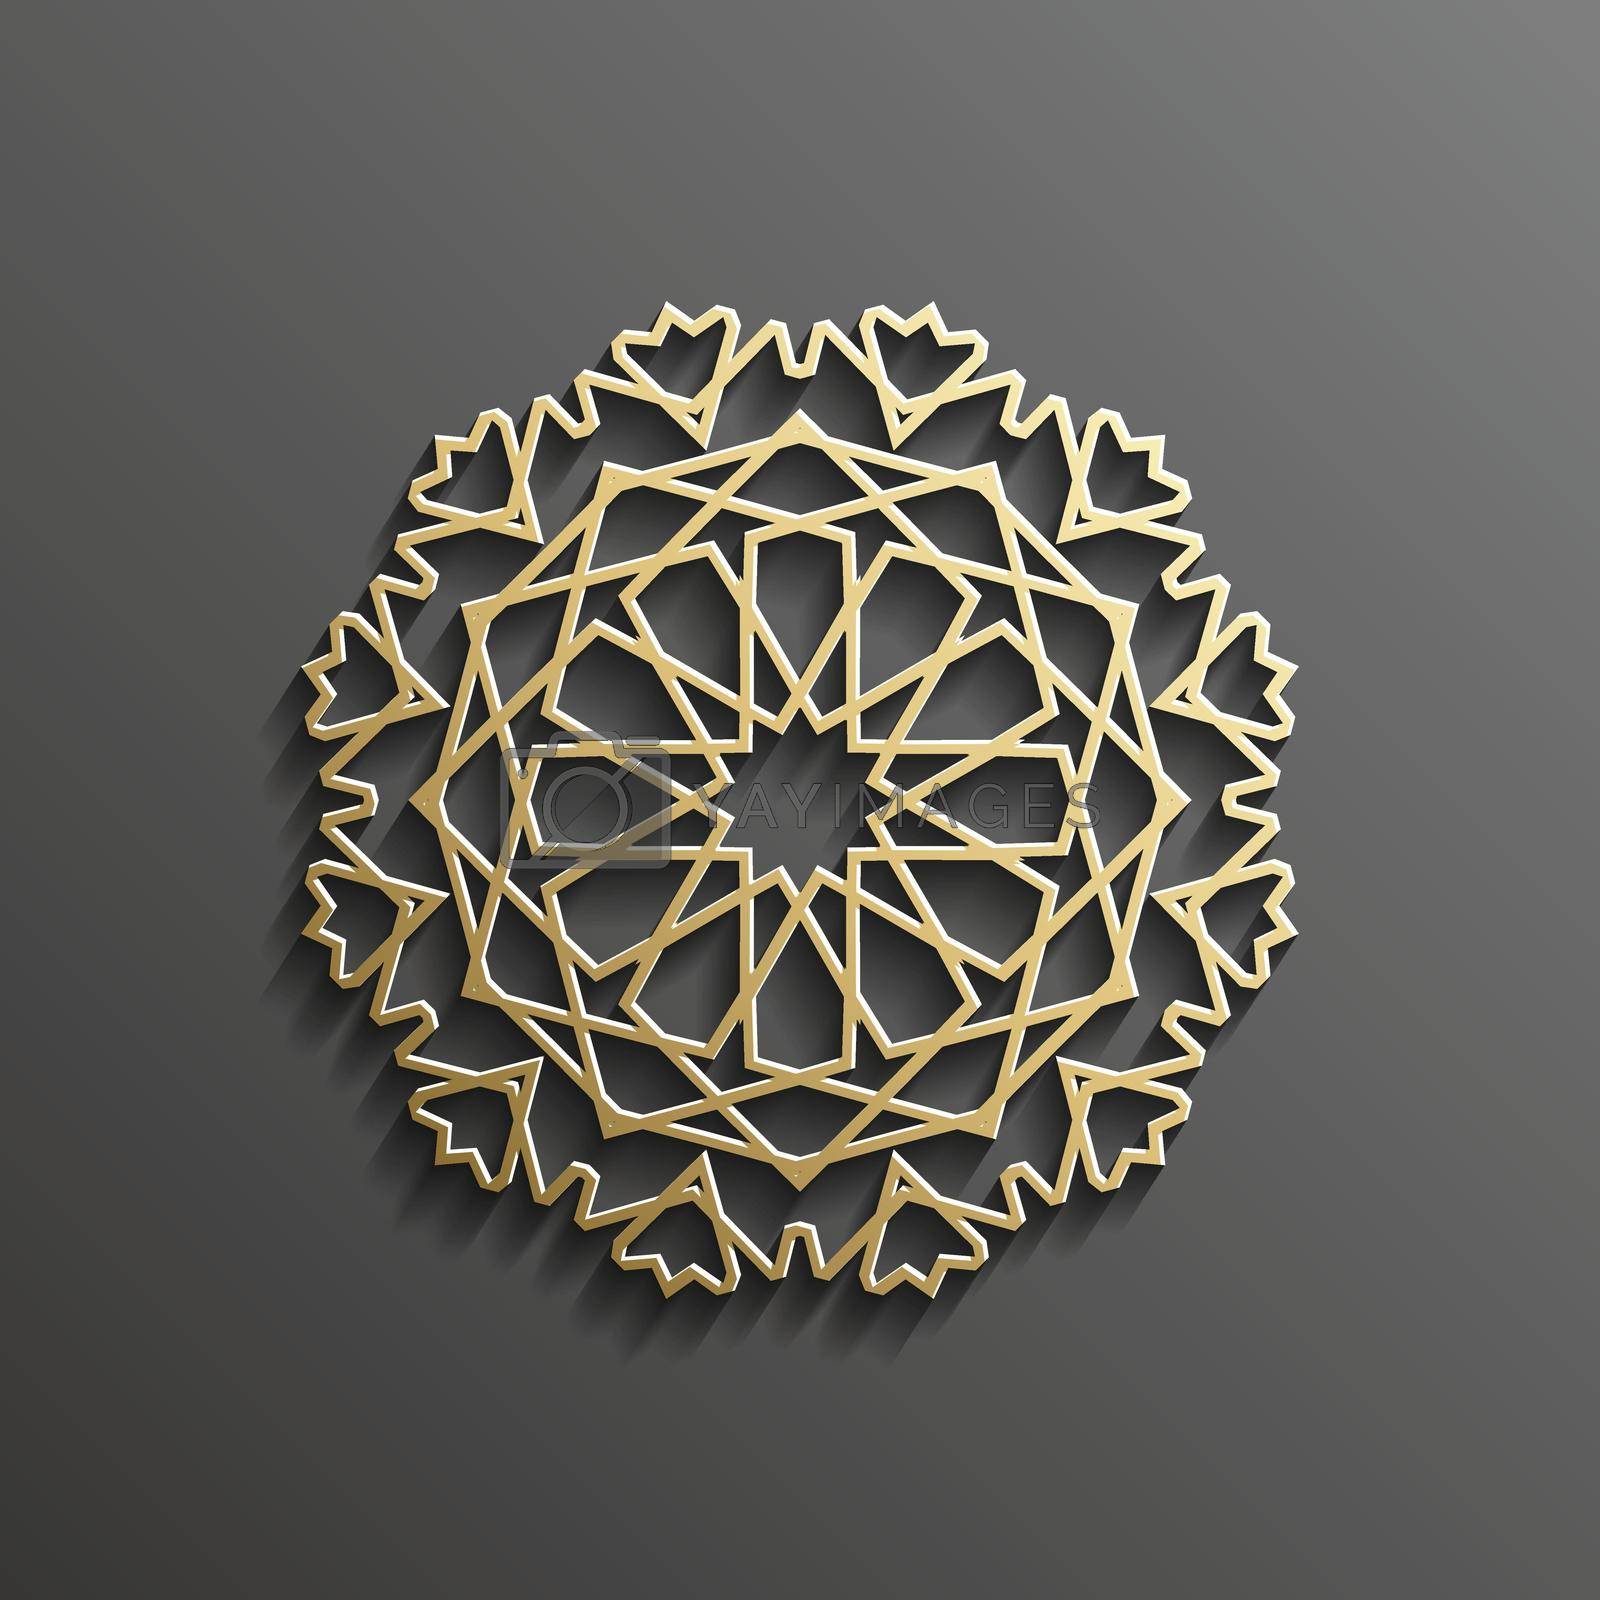 Royalty free image of Islamic 3d gold on dark mandala round ornament background architectural muslim texture design . Can be used for brochures invitations,persian motif by DmytroRazinkov